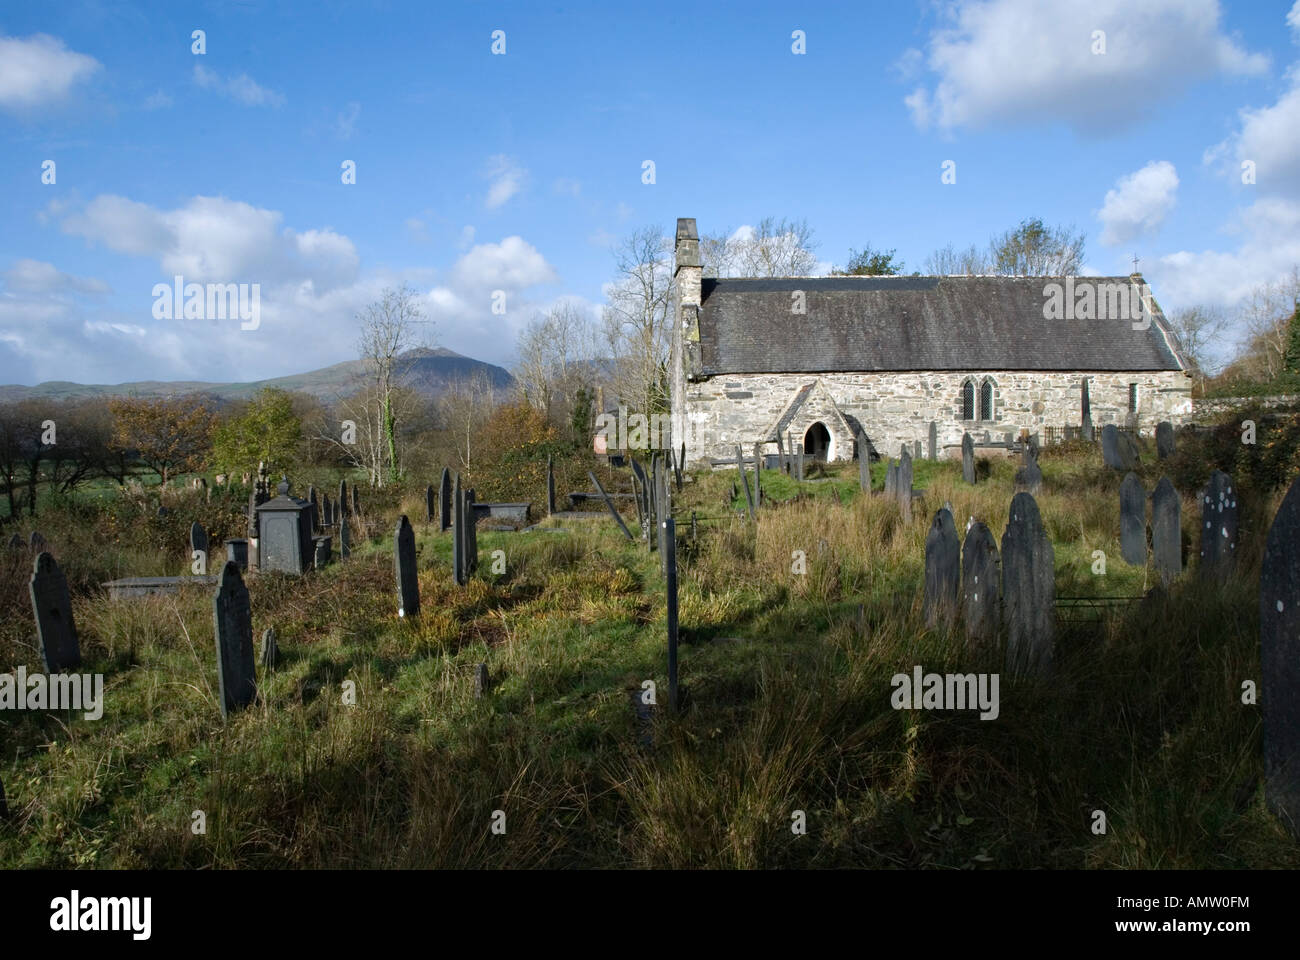 St Brothen's Church, Llanfrothen, Gwynedd, Wales, UK. A medieval church in the care of the Friends of Friendless Churches Stock Photo